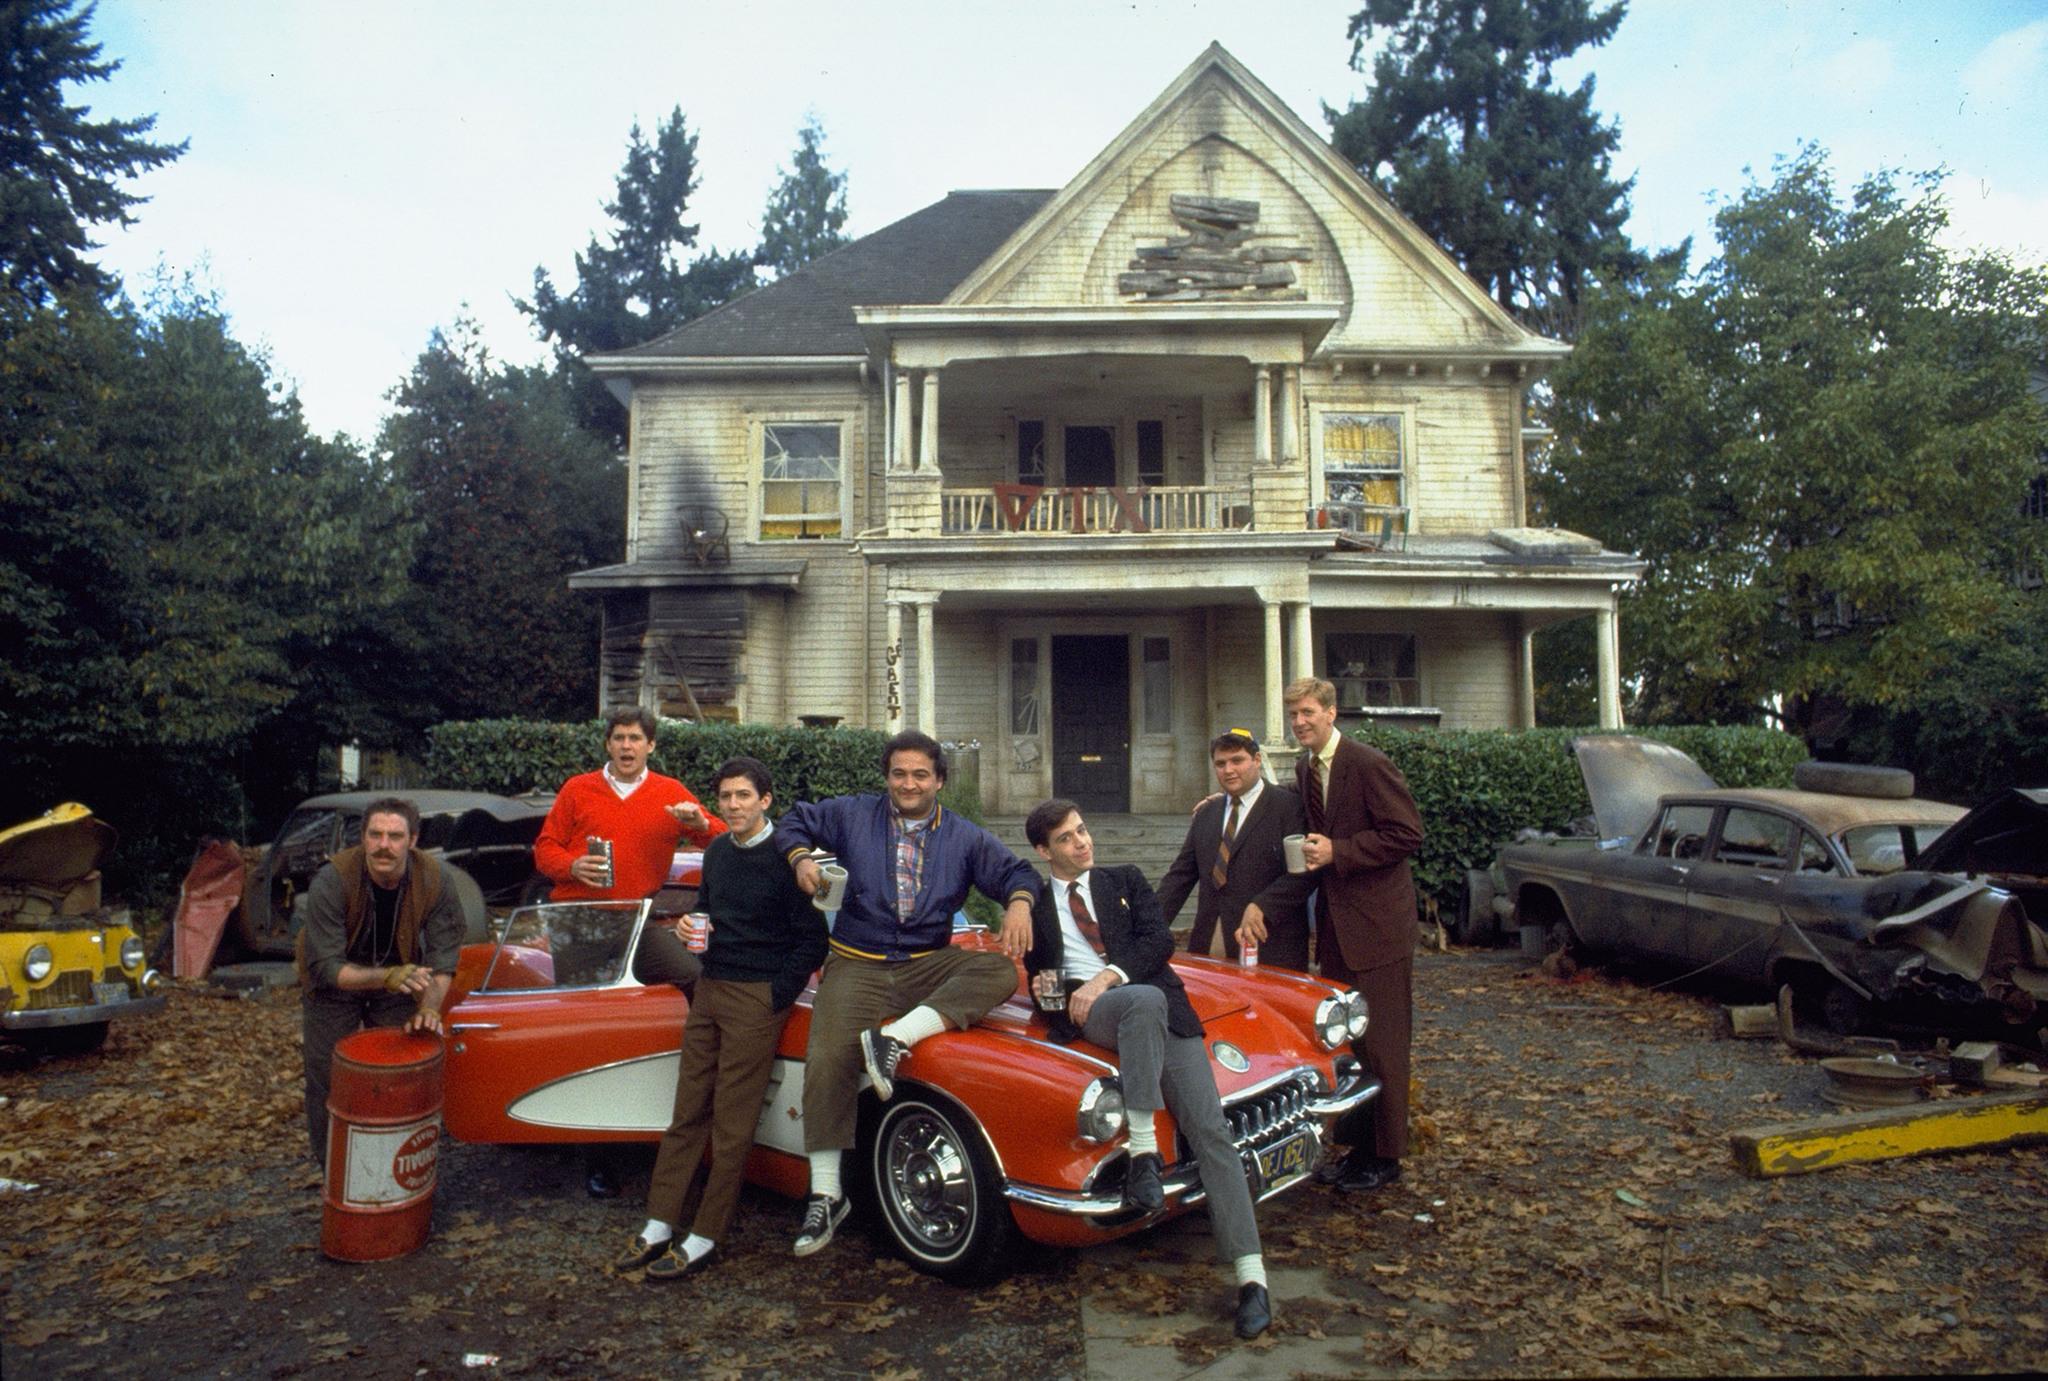 still-of-john-belushi-tom-hulce-tim-matheson-stephen-furst-bruce-mcgill-peter-riegert-and-james-widdoes-in-animal-house-1978-large-picture.jpg